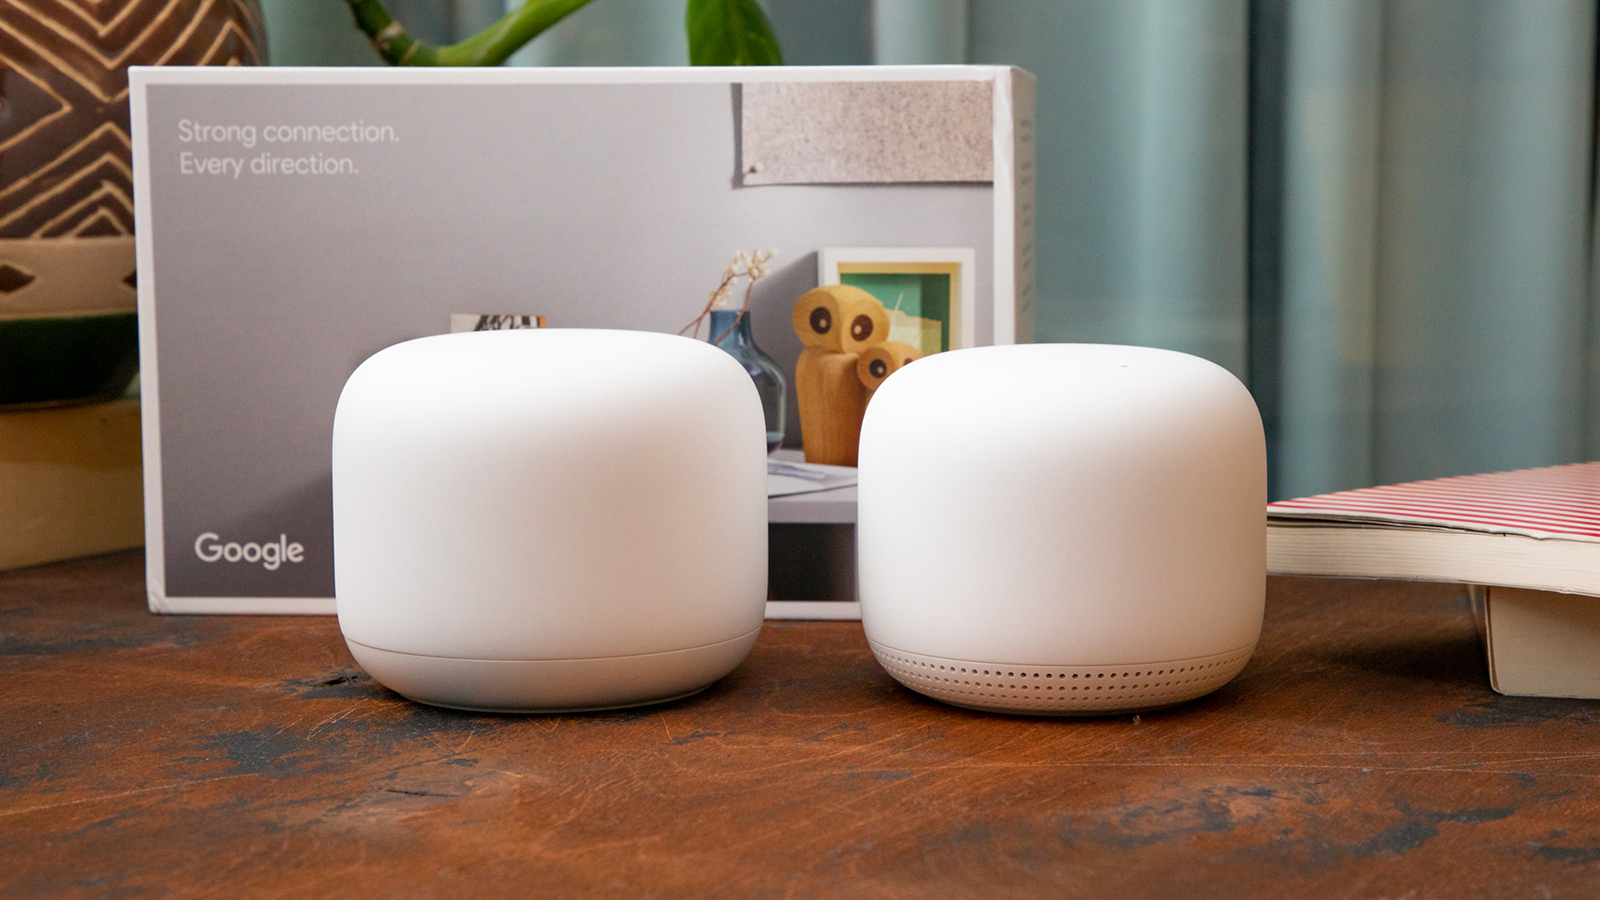 Google reports its new Home WiFi Pro mesh router system